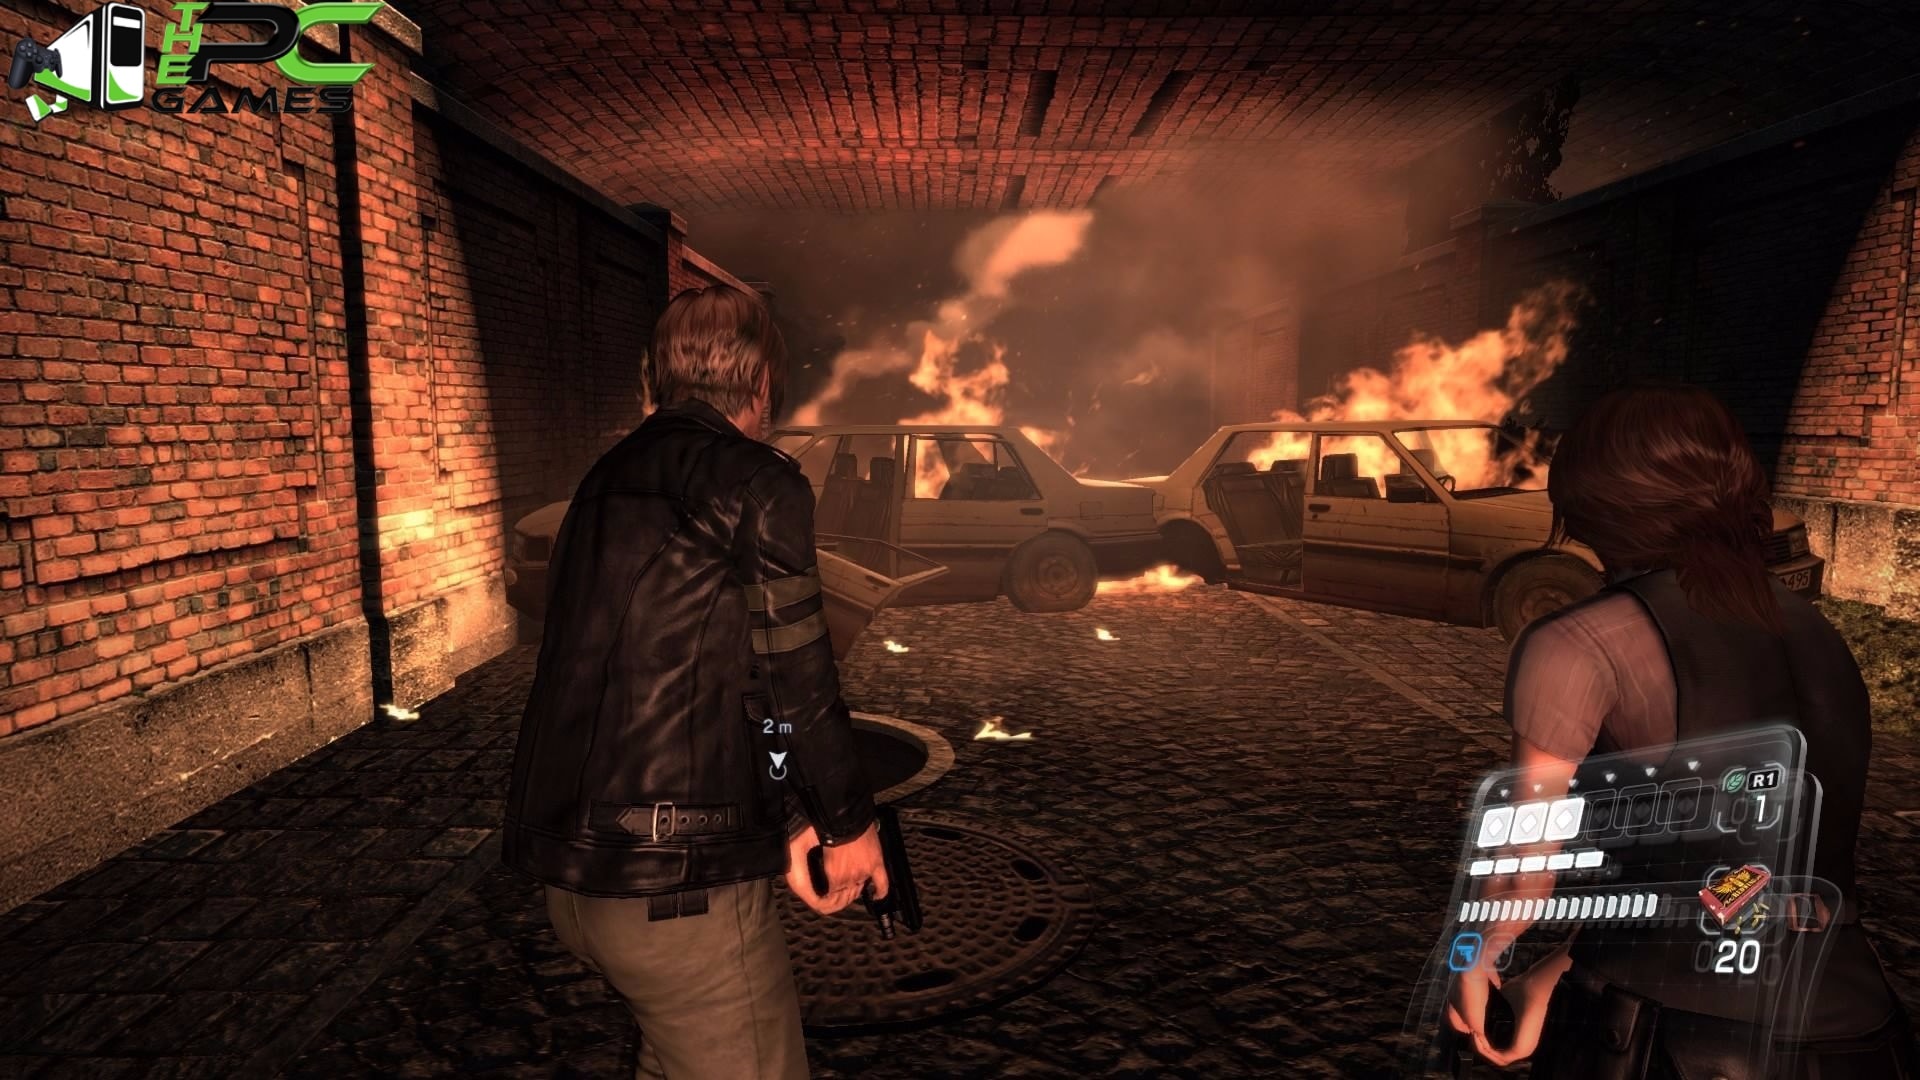 Resident evil 6 pc review